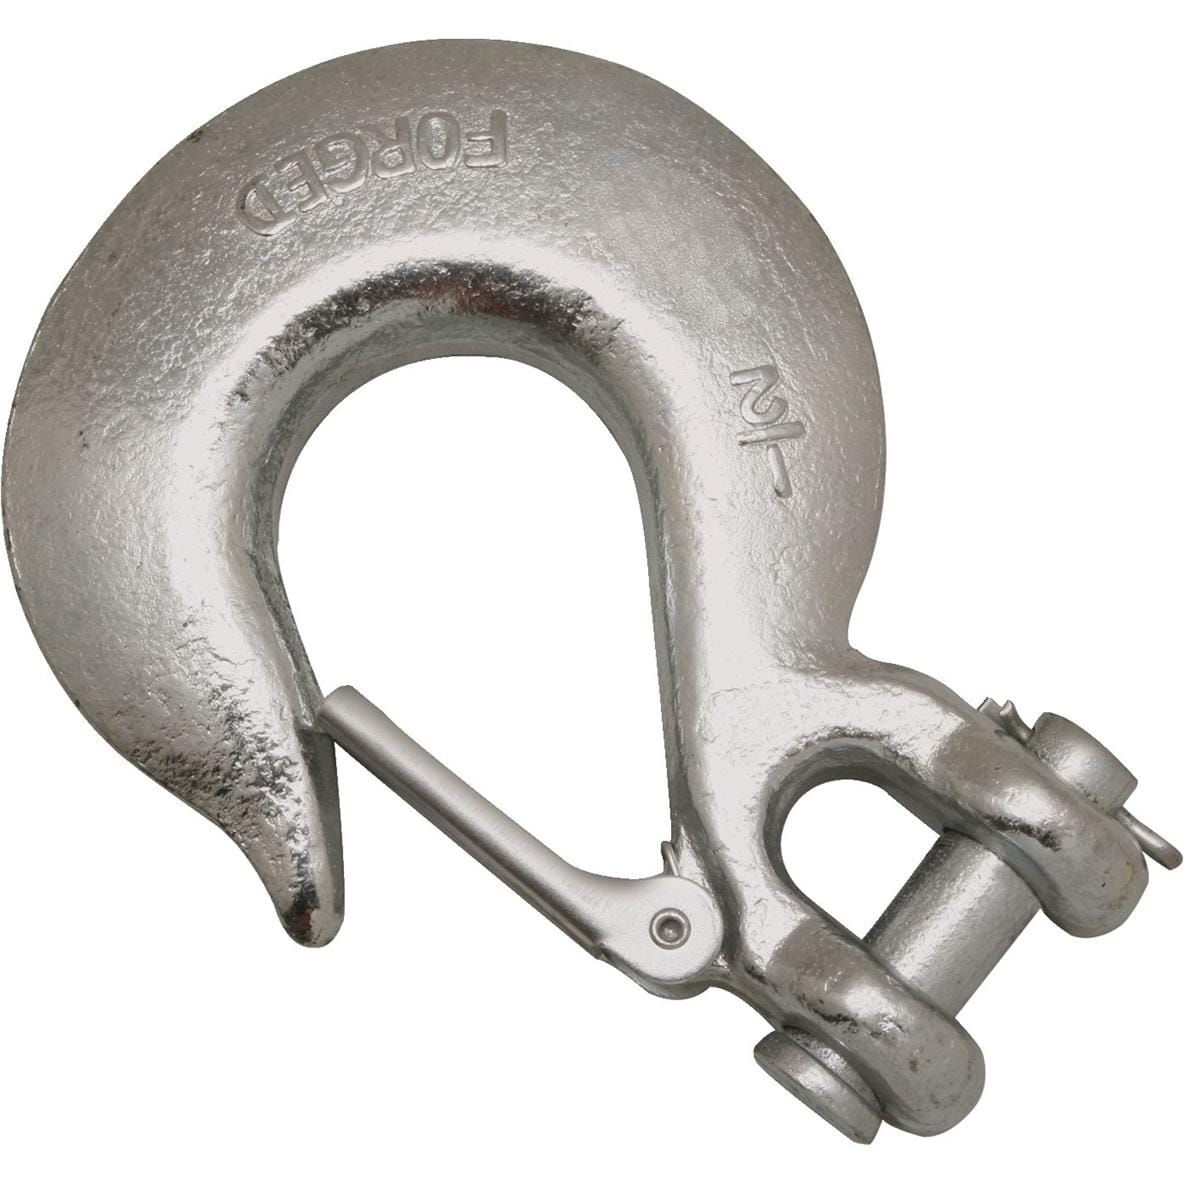 Grade 70 Chain Hook with Latch, 3/8 / 6,600 lb. by Gemplers 173293